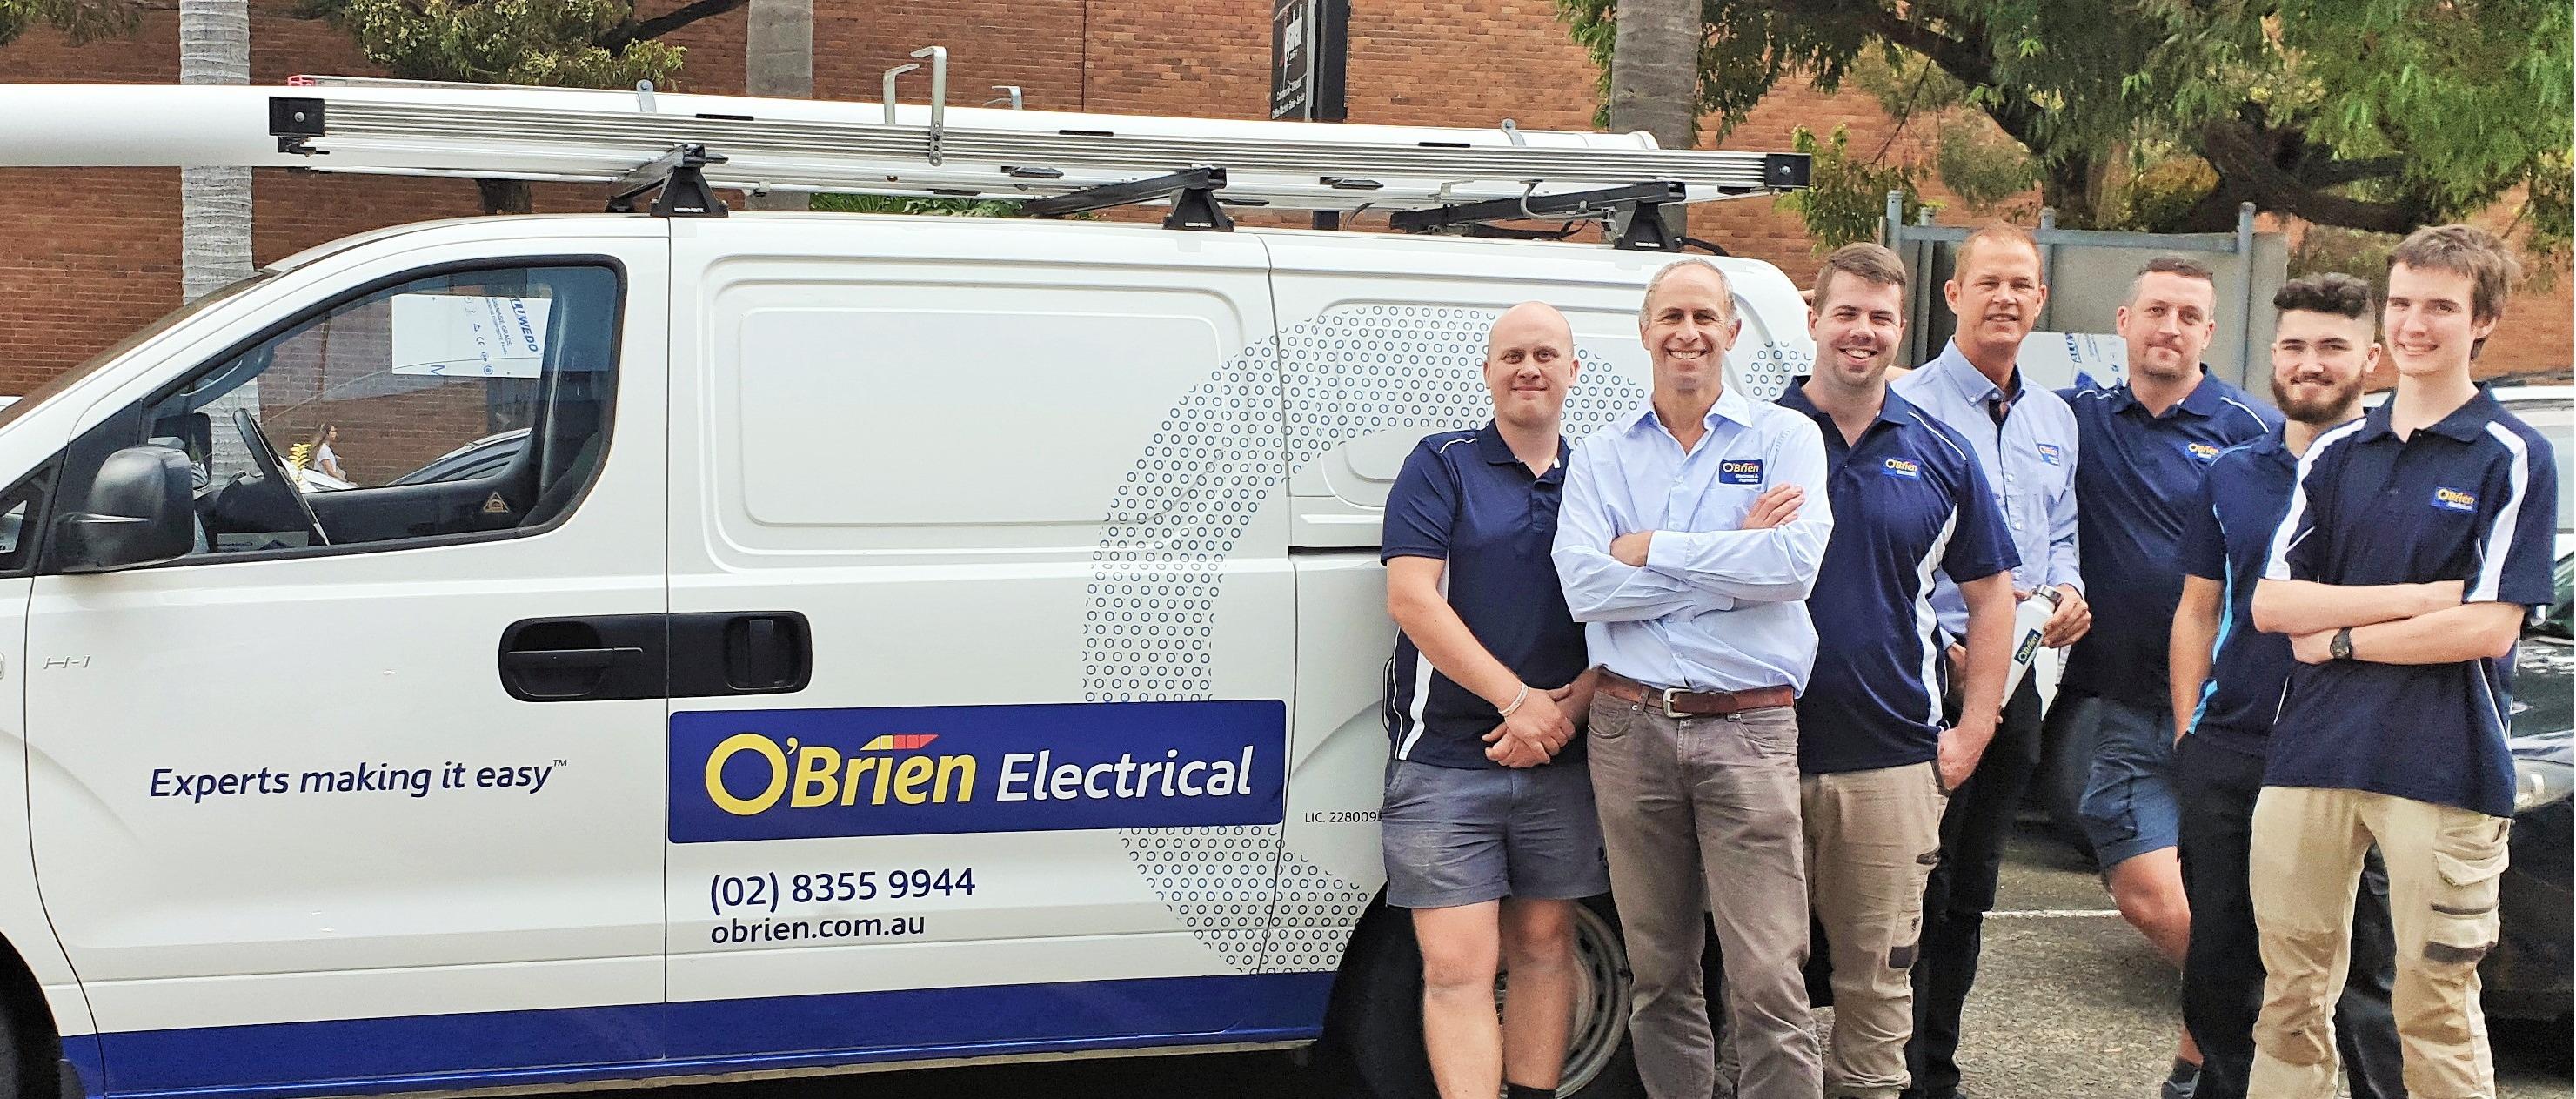 The O'Brien Electrical Alexandria team standing next to the work van